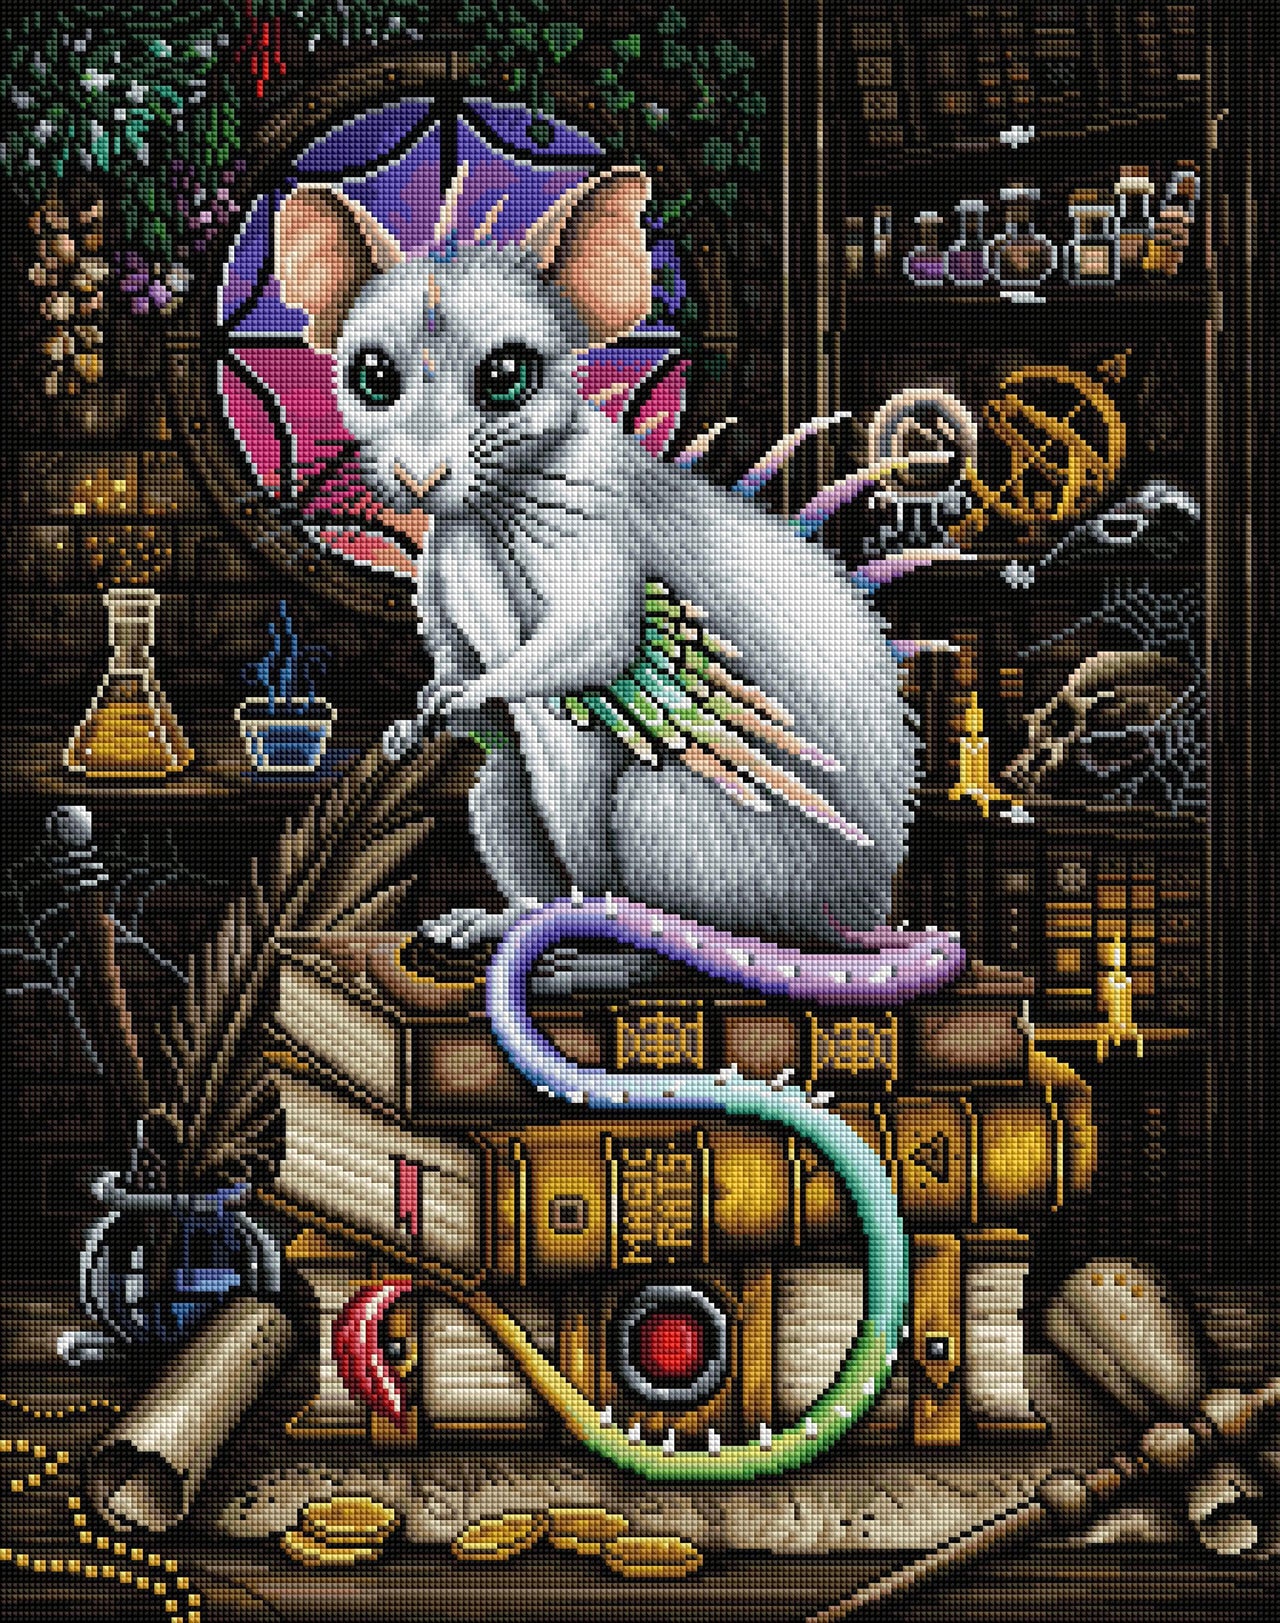 Diamond Painting Magic Rats 22" x 28" (55.8cm x 70.7cm) / Square with 72 Colors including 2 ABs, 1 Iridescent Diamonds and 1 Fairy Dust Diamonds / 63,616